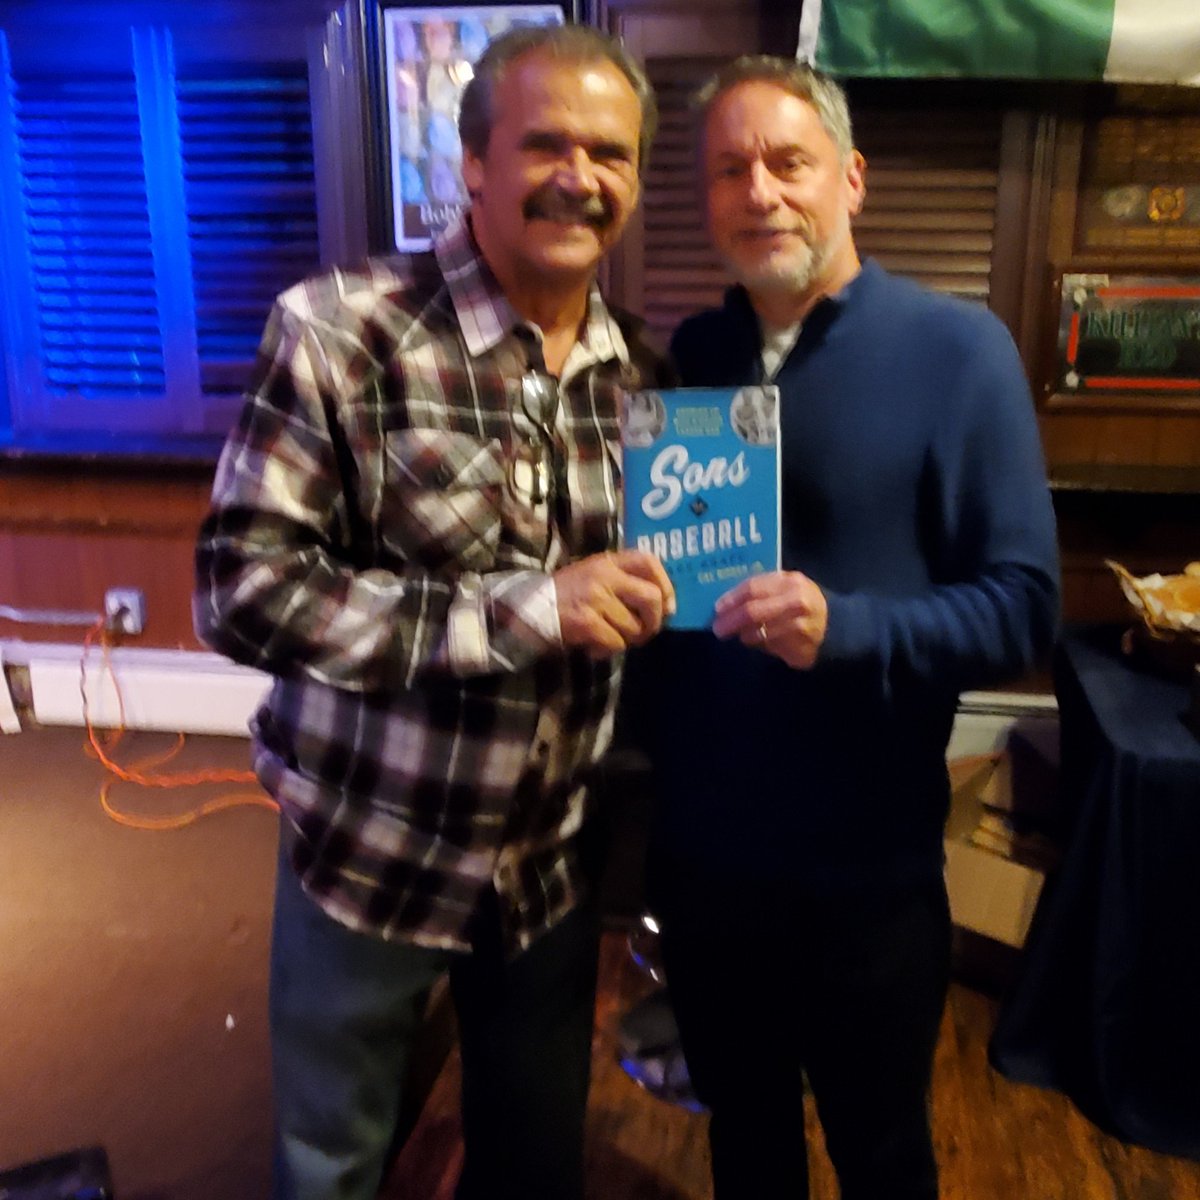 Chatted with @Yankees legend Ron Guidry this evening about my book, Sons of Baseball. Ron's son, Brandon, is one of 18 sons of former major leaguers who share their unique boyhood experiences in the book @RLPGBooks